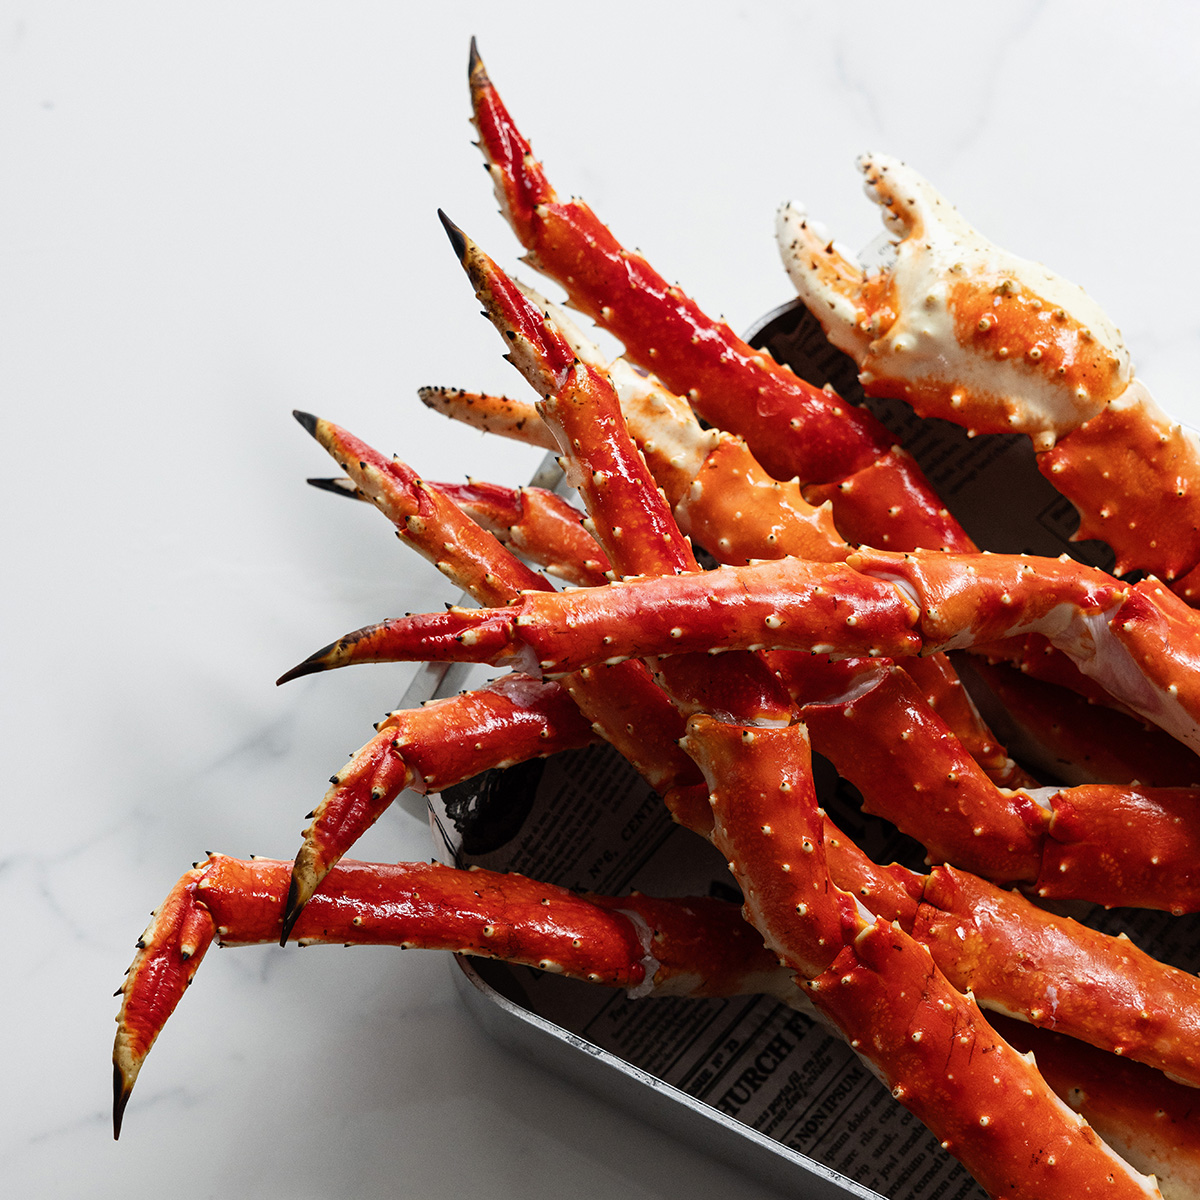 King crab preferred by chefs worldwide